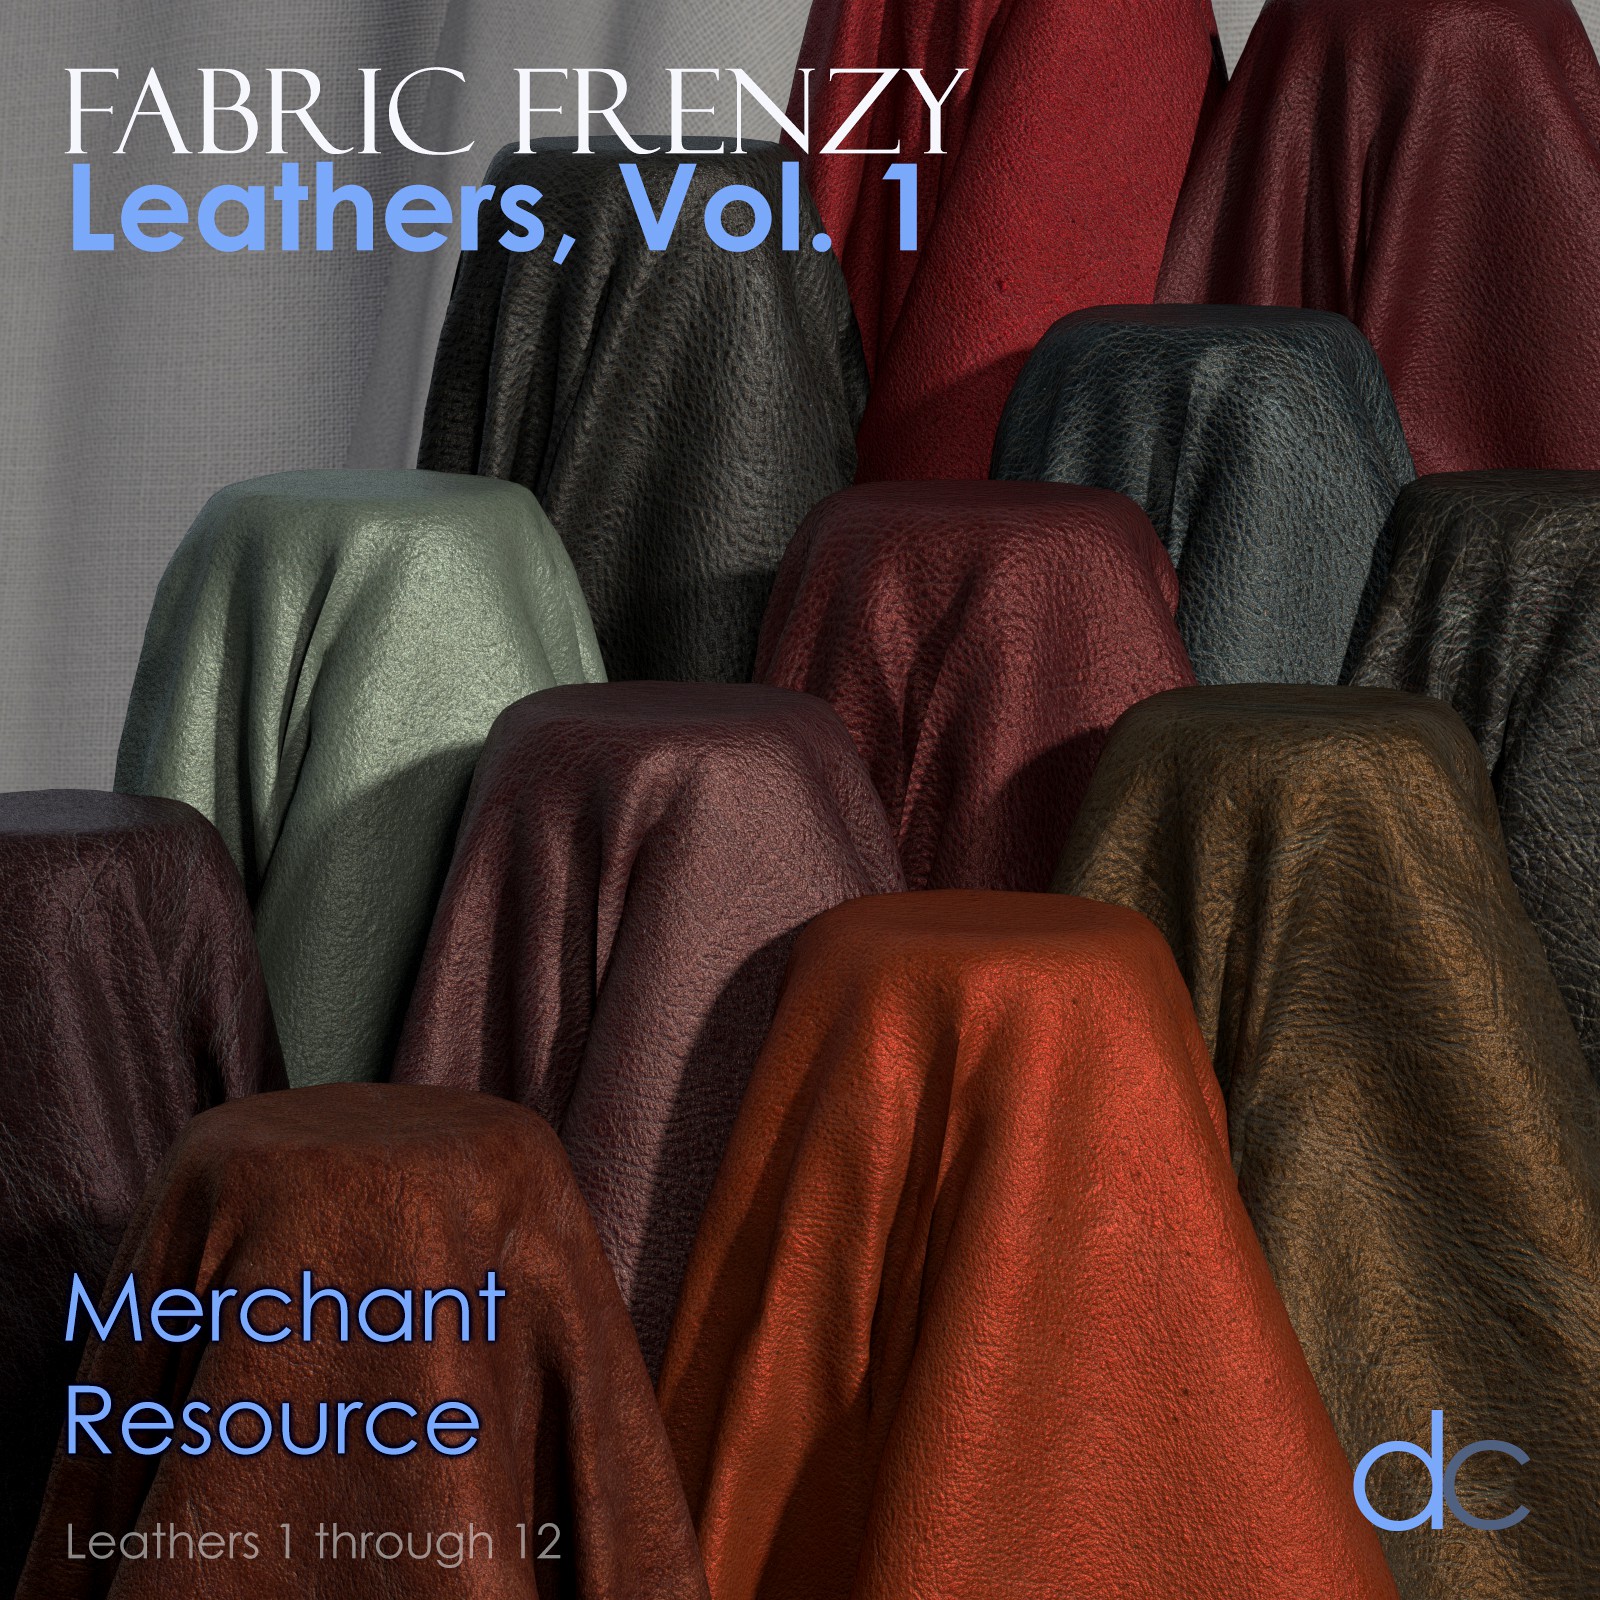 Fabric Frenzy: Leathers Vol 1 PBR Textures and Poser Shaders